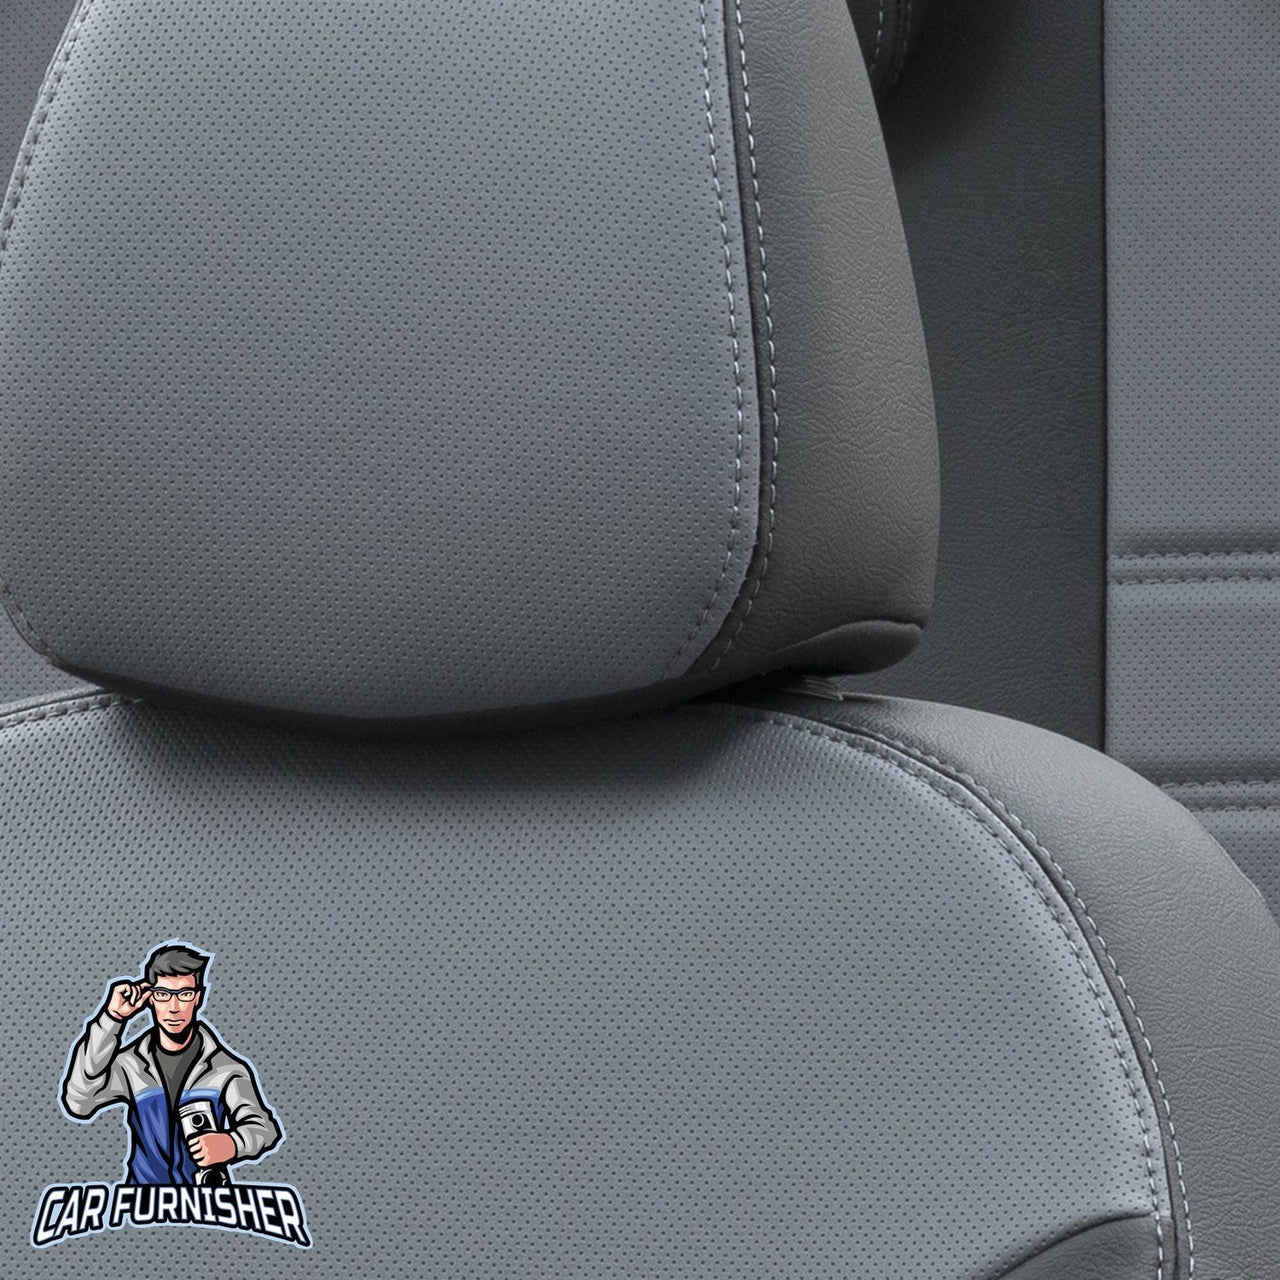 Subaru Forester Seat Cover Istanbul Leather Design Smoked Black Leather